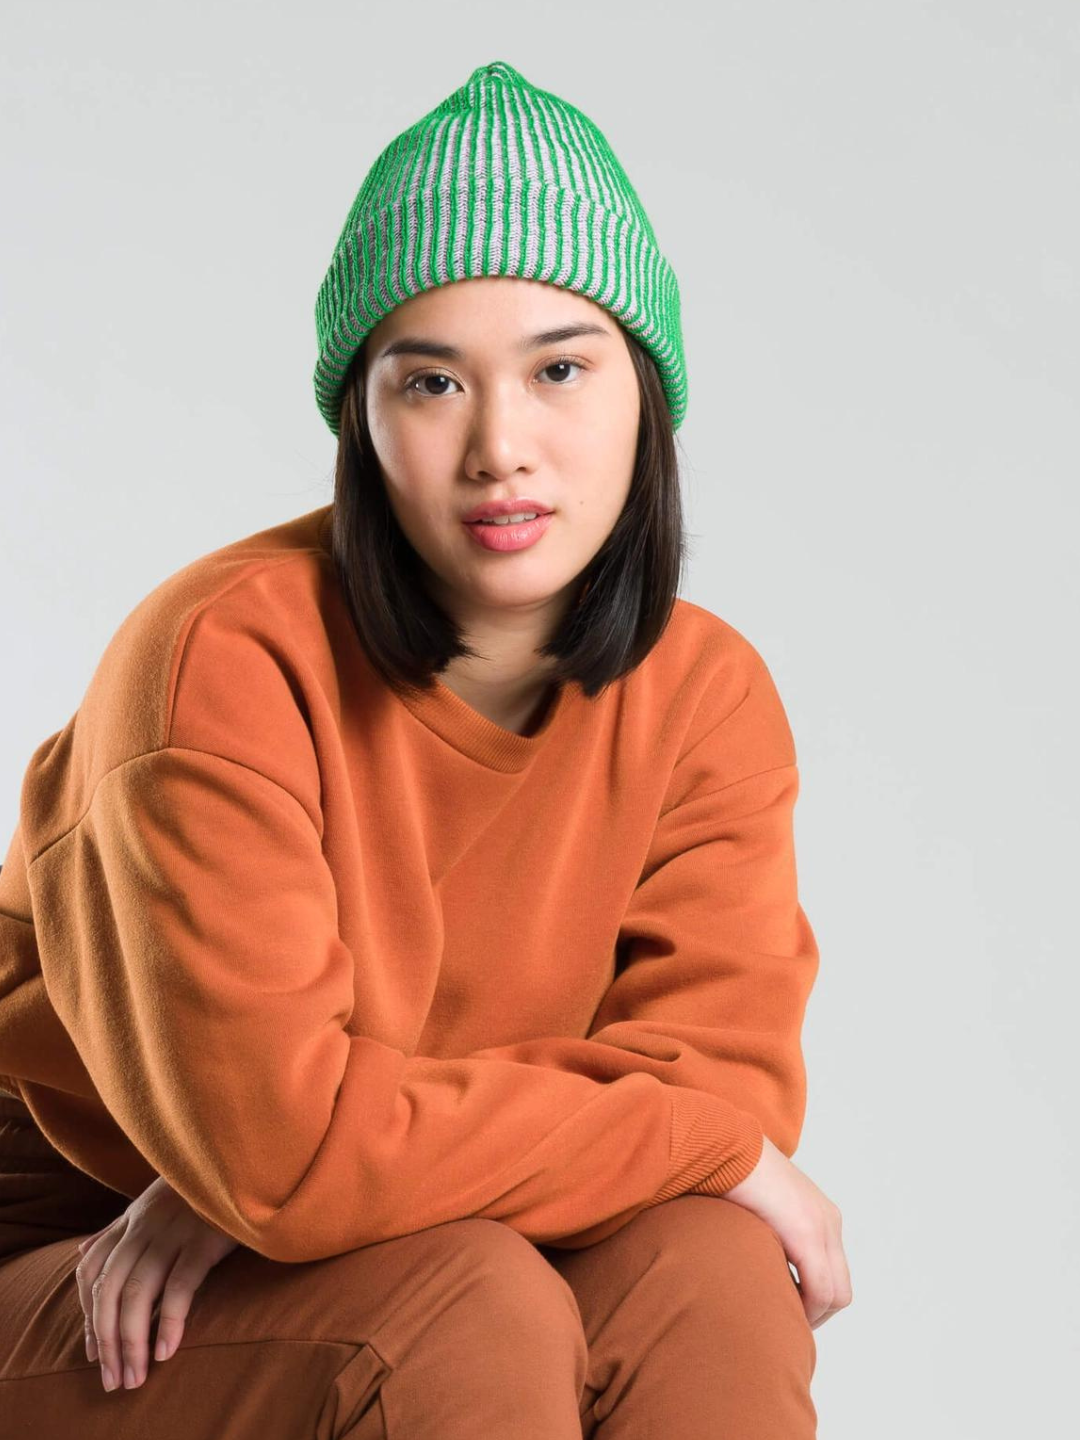 Kelly/Lilac | A woman wearing a kelly green ribbed beanie for big kids and adults, with a ribbed cuff. The ribbed texture reveals a second yarn color that's light purple. She is wearing a rust orange sweatshirt and pants, and is seated in front of a grey wall.